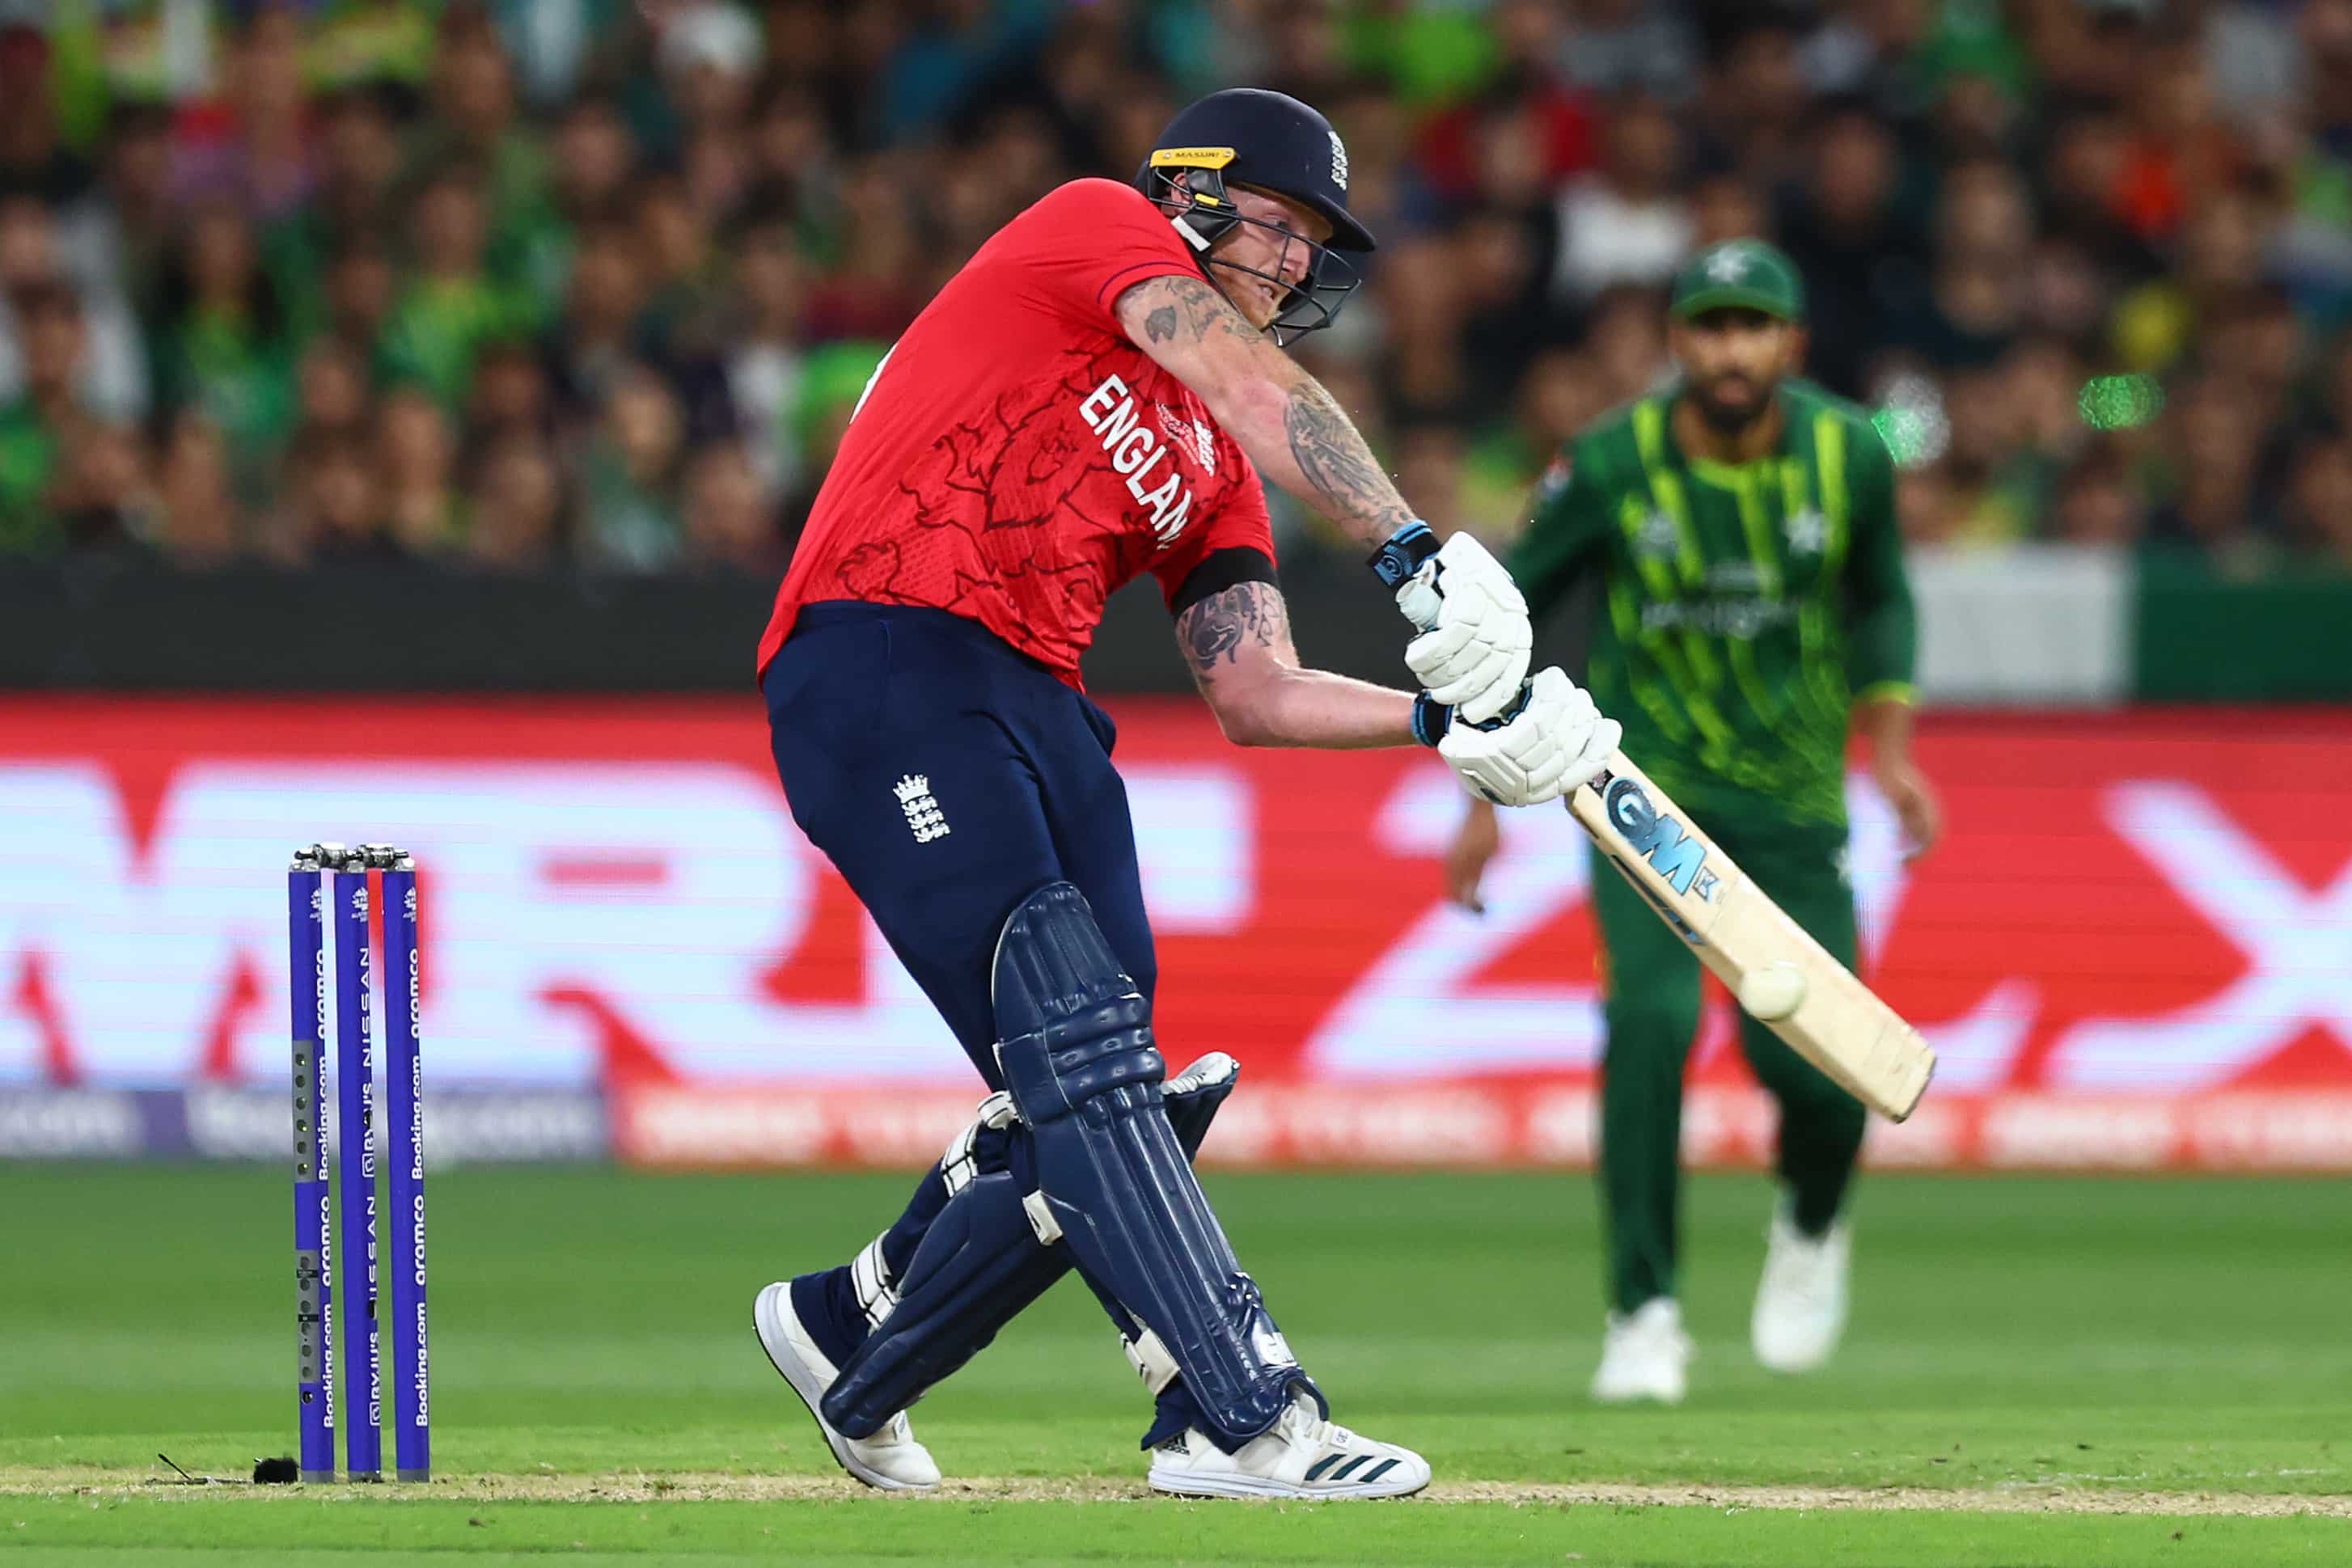 England vs Pakistan Final Highlights, ICC T20 World Cup 2022 ENGLAND THRASH PAK BY 5 WKTS TO BECOME T20 WORLD CUP CHAMPIONS — As it happened Zee Business